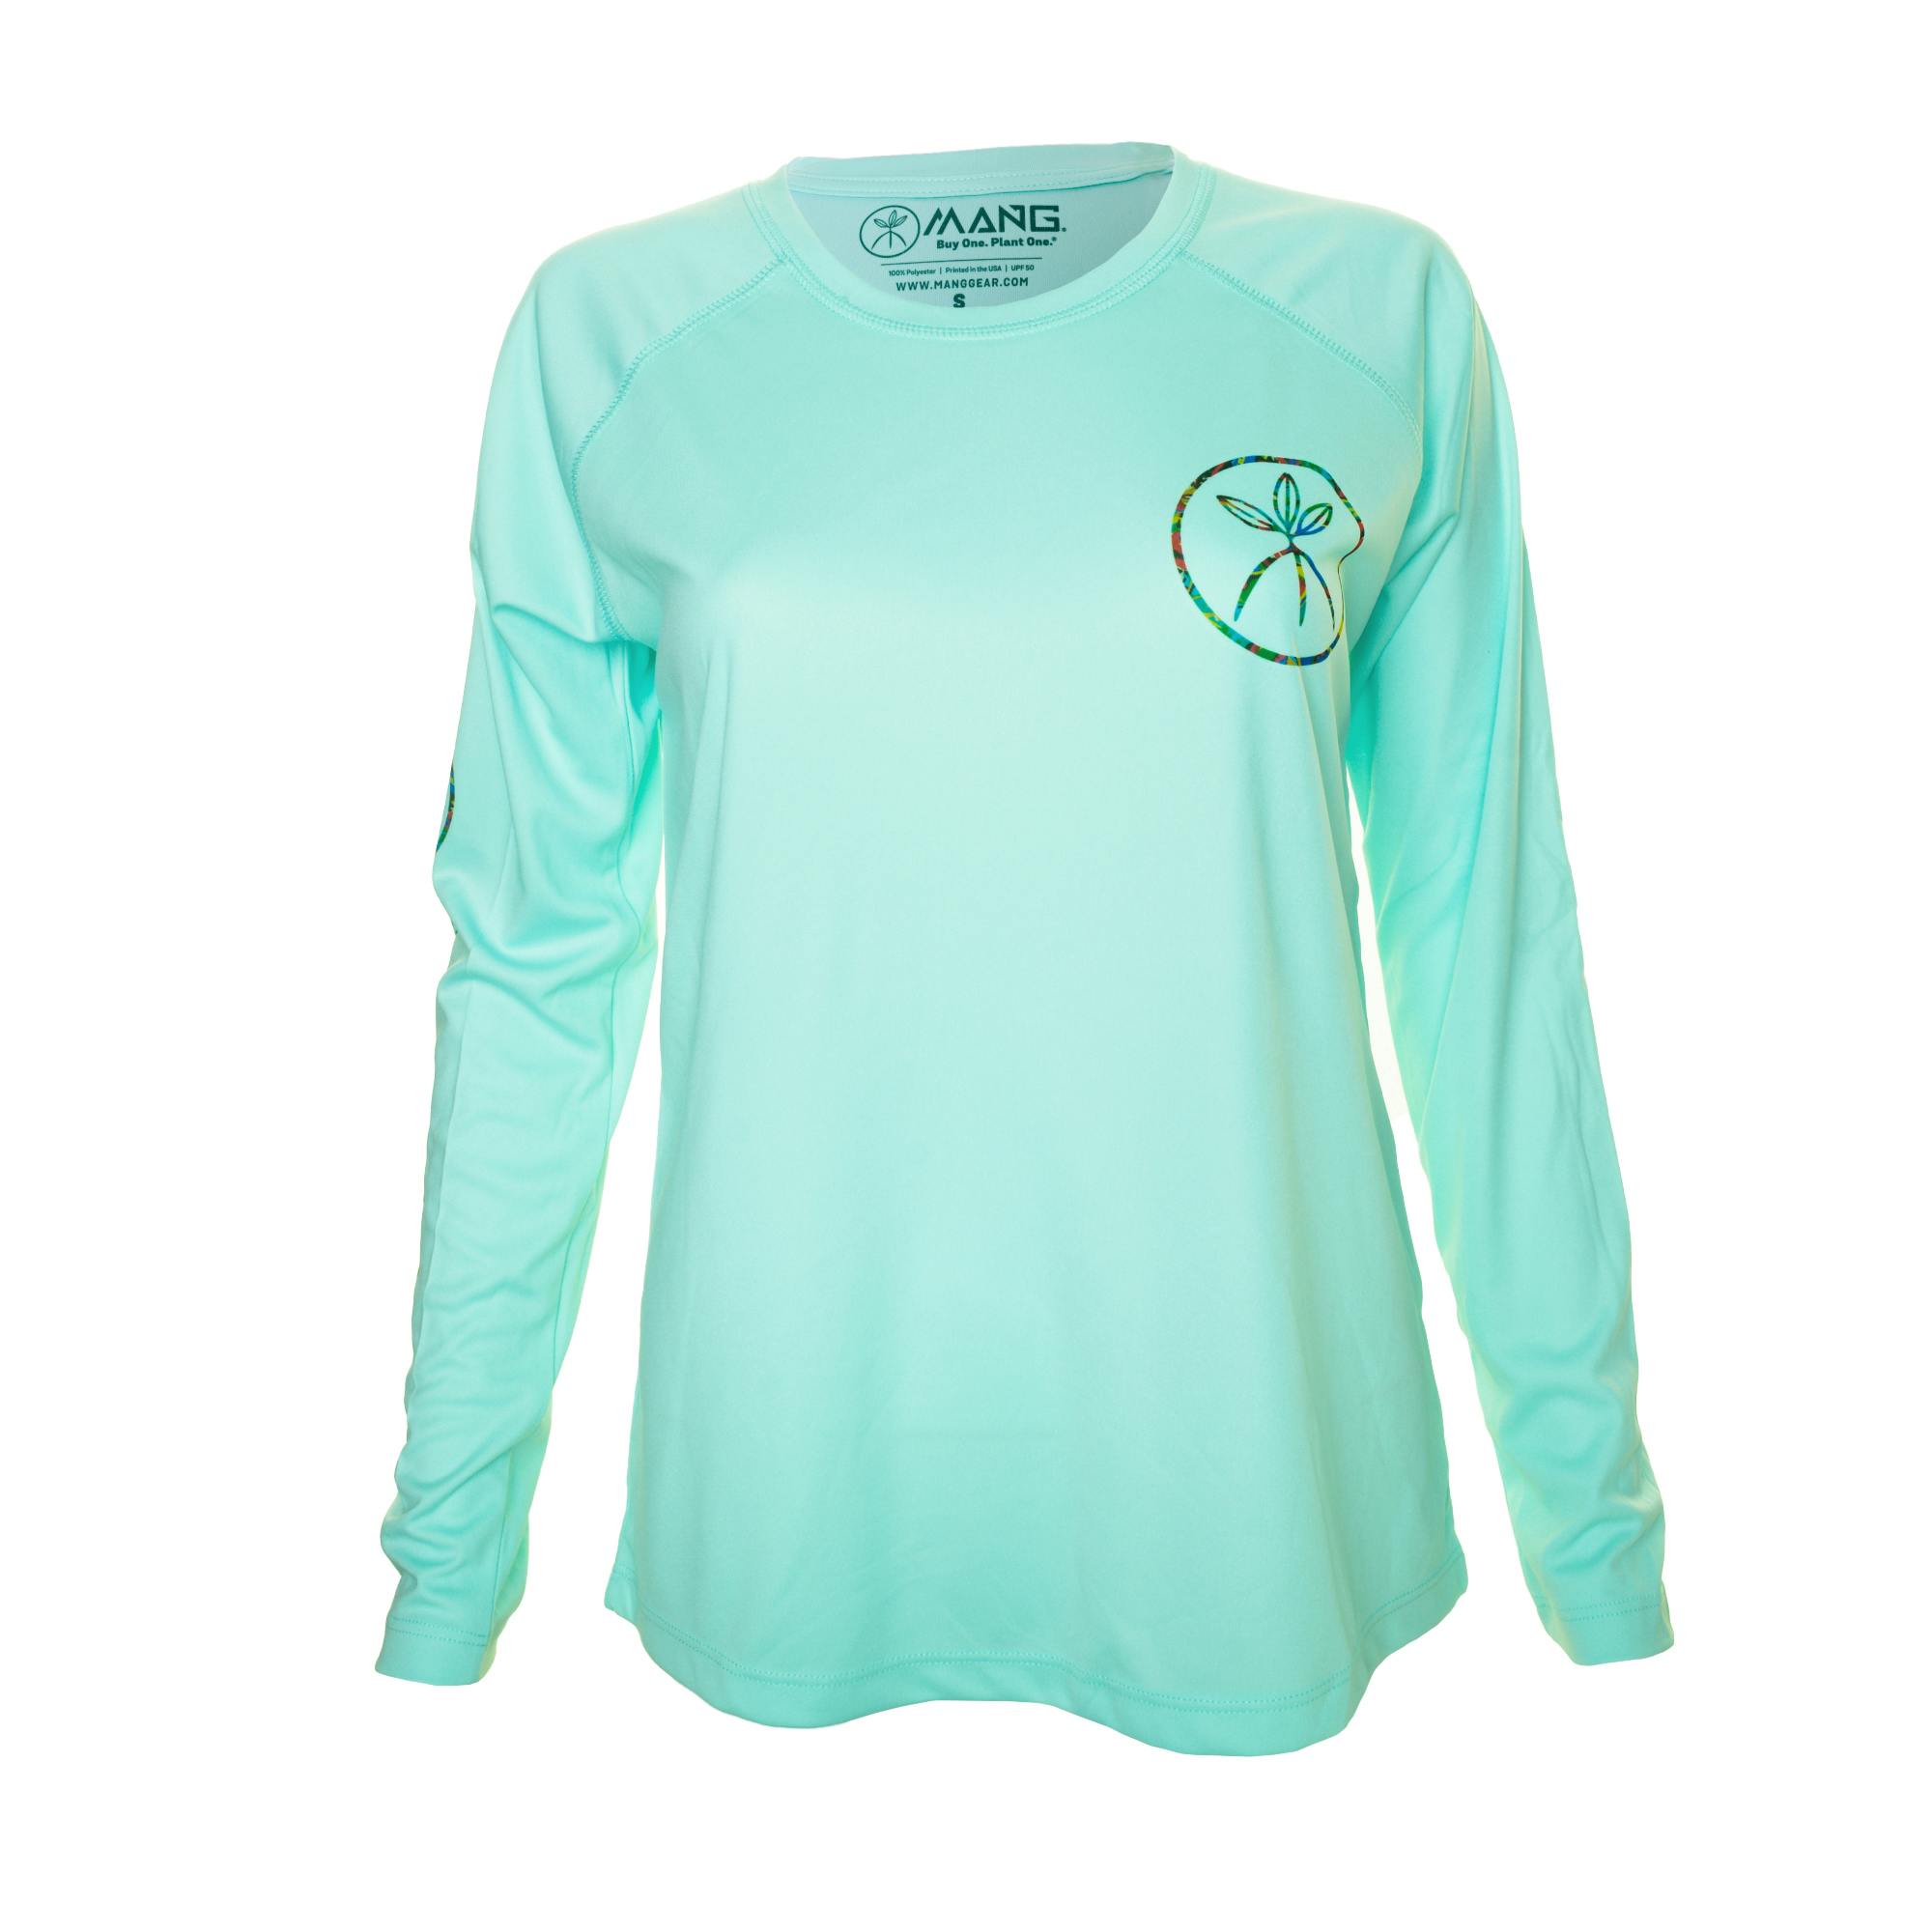 MANG Planting Hope Turtle Long Sleeve Performance Shirt (Women's) Front - Seagrass